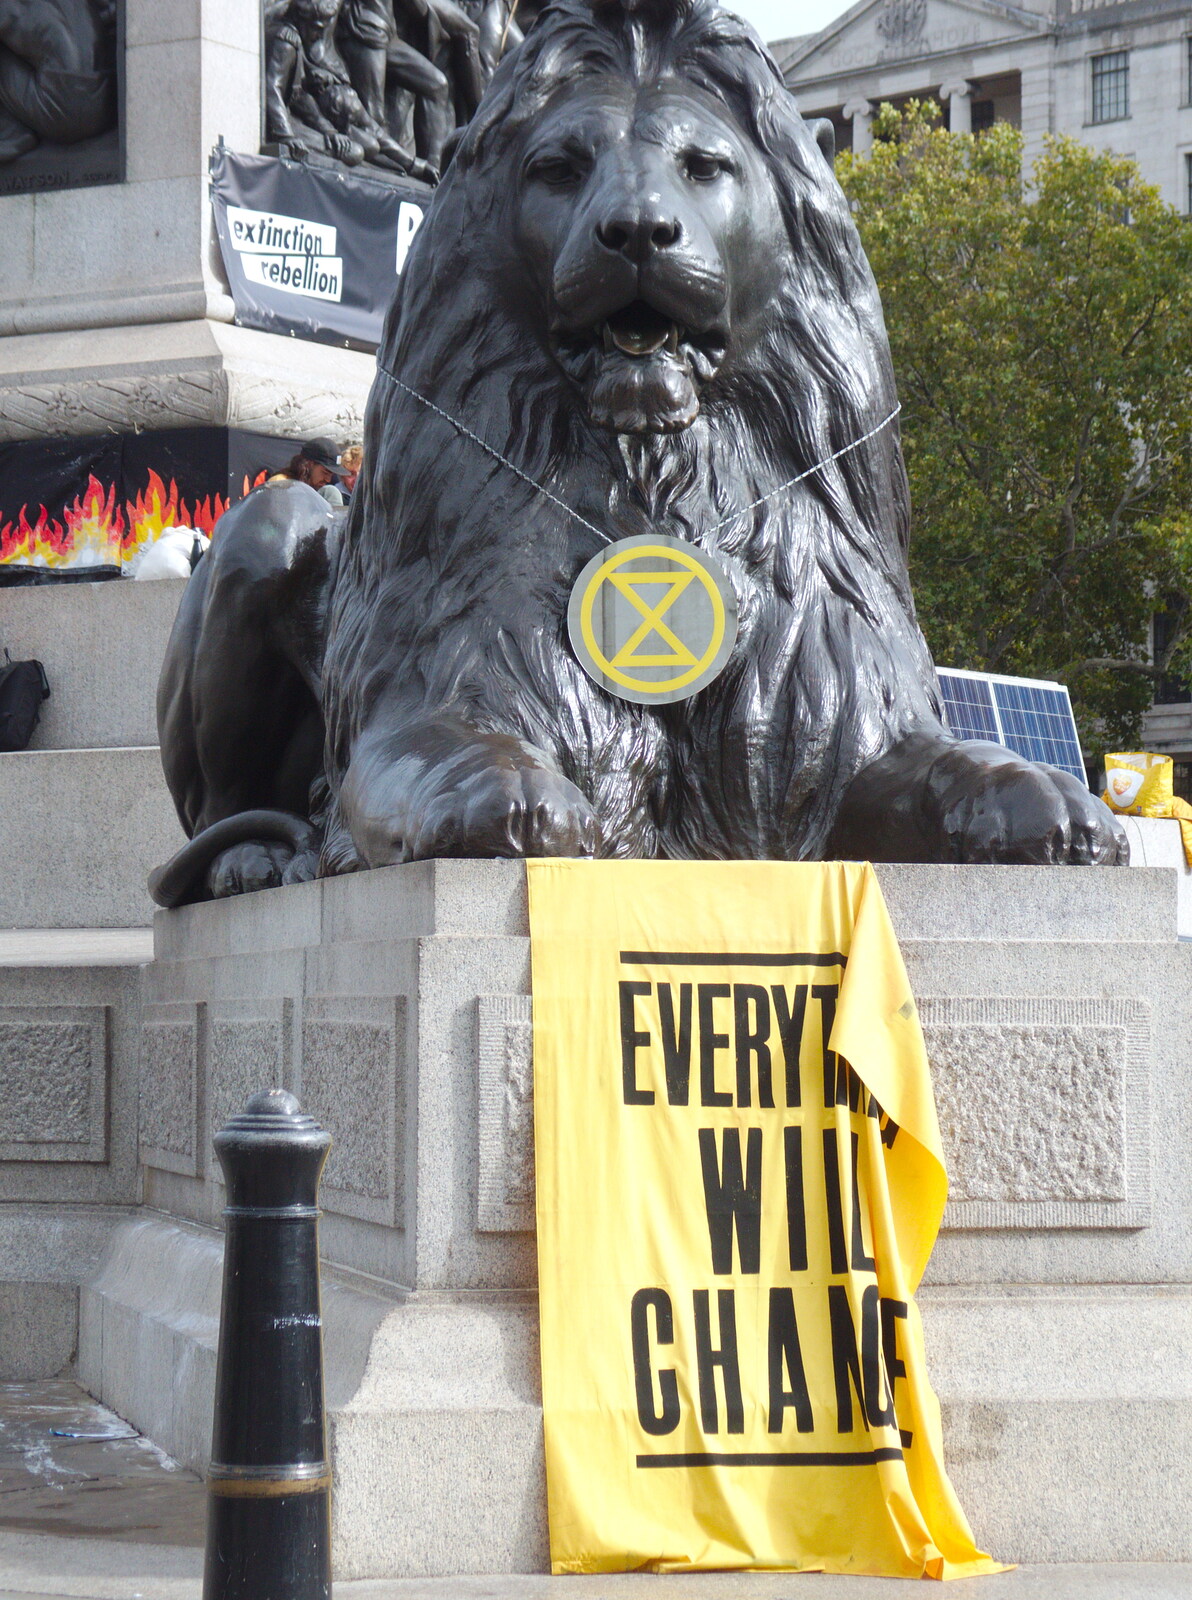 A Trafalgar lion has an XR medallion around its neck from The Extinction Rebellion Protest, Westminster, London - 9th October 2019